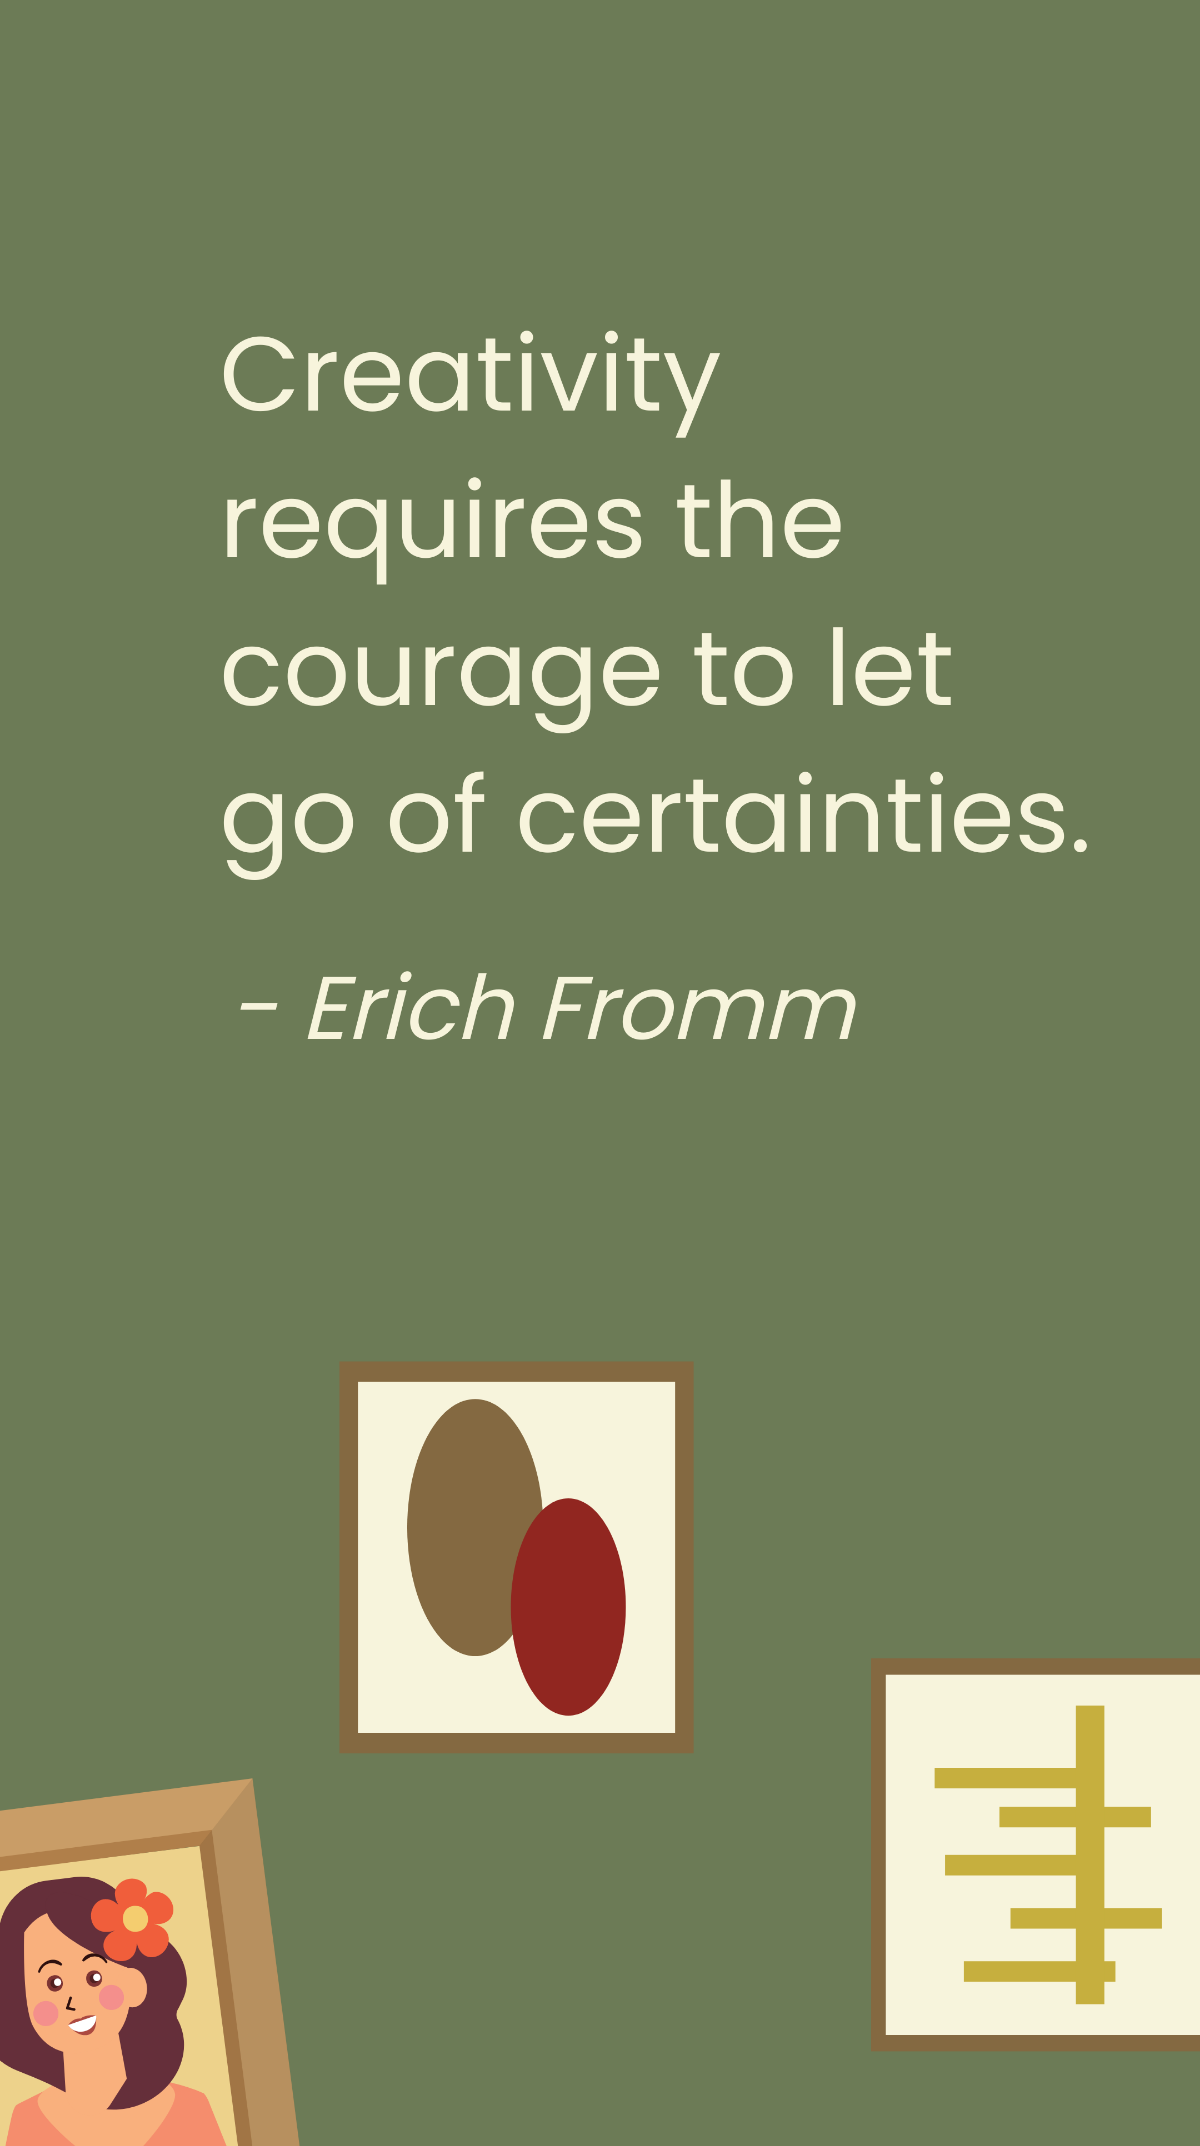 Erich Fromm - Creativity requires the courage to let go of certainties. Template